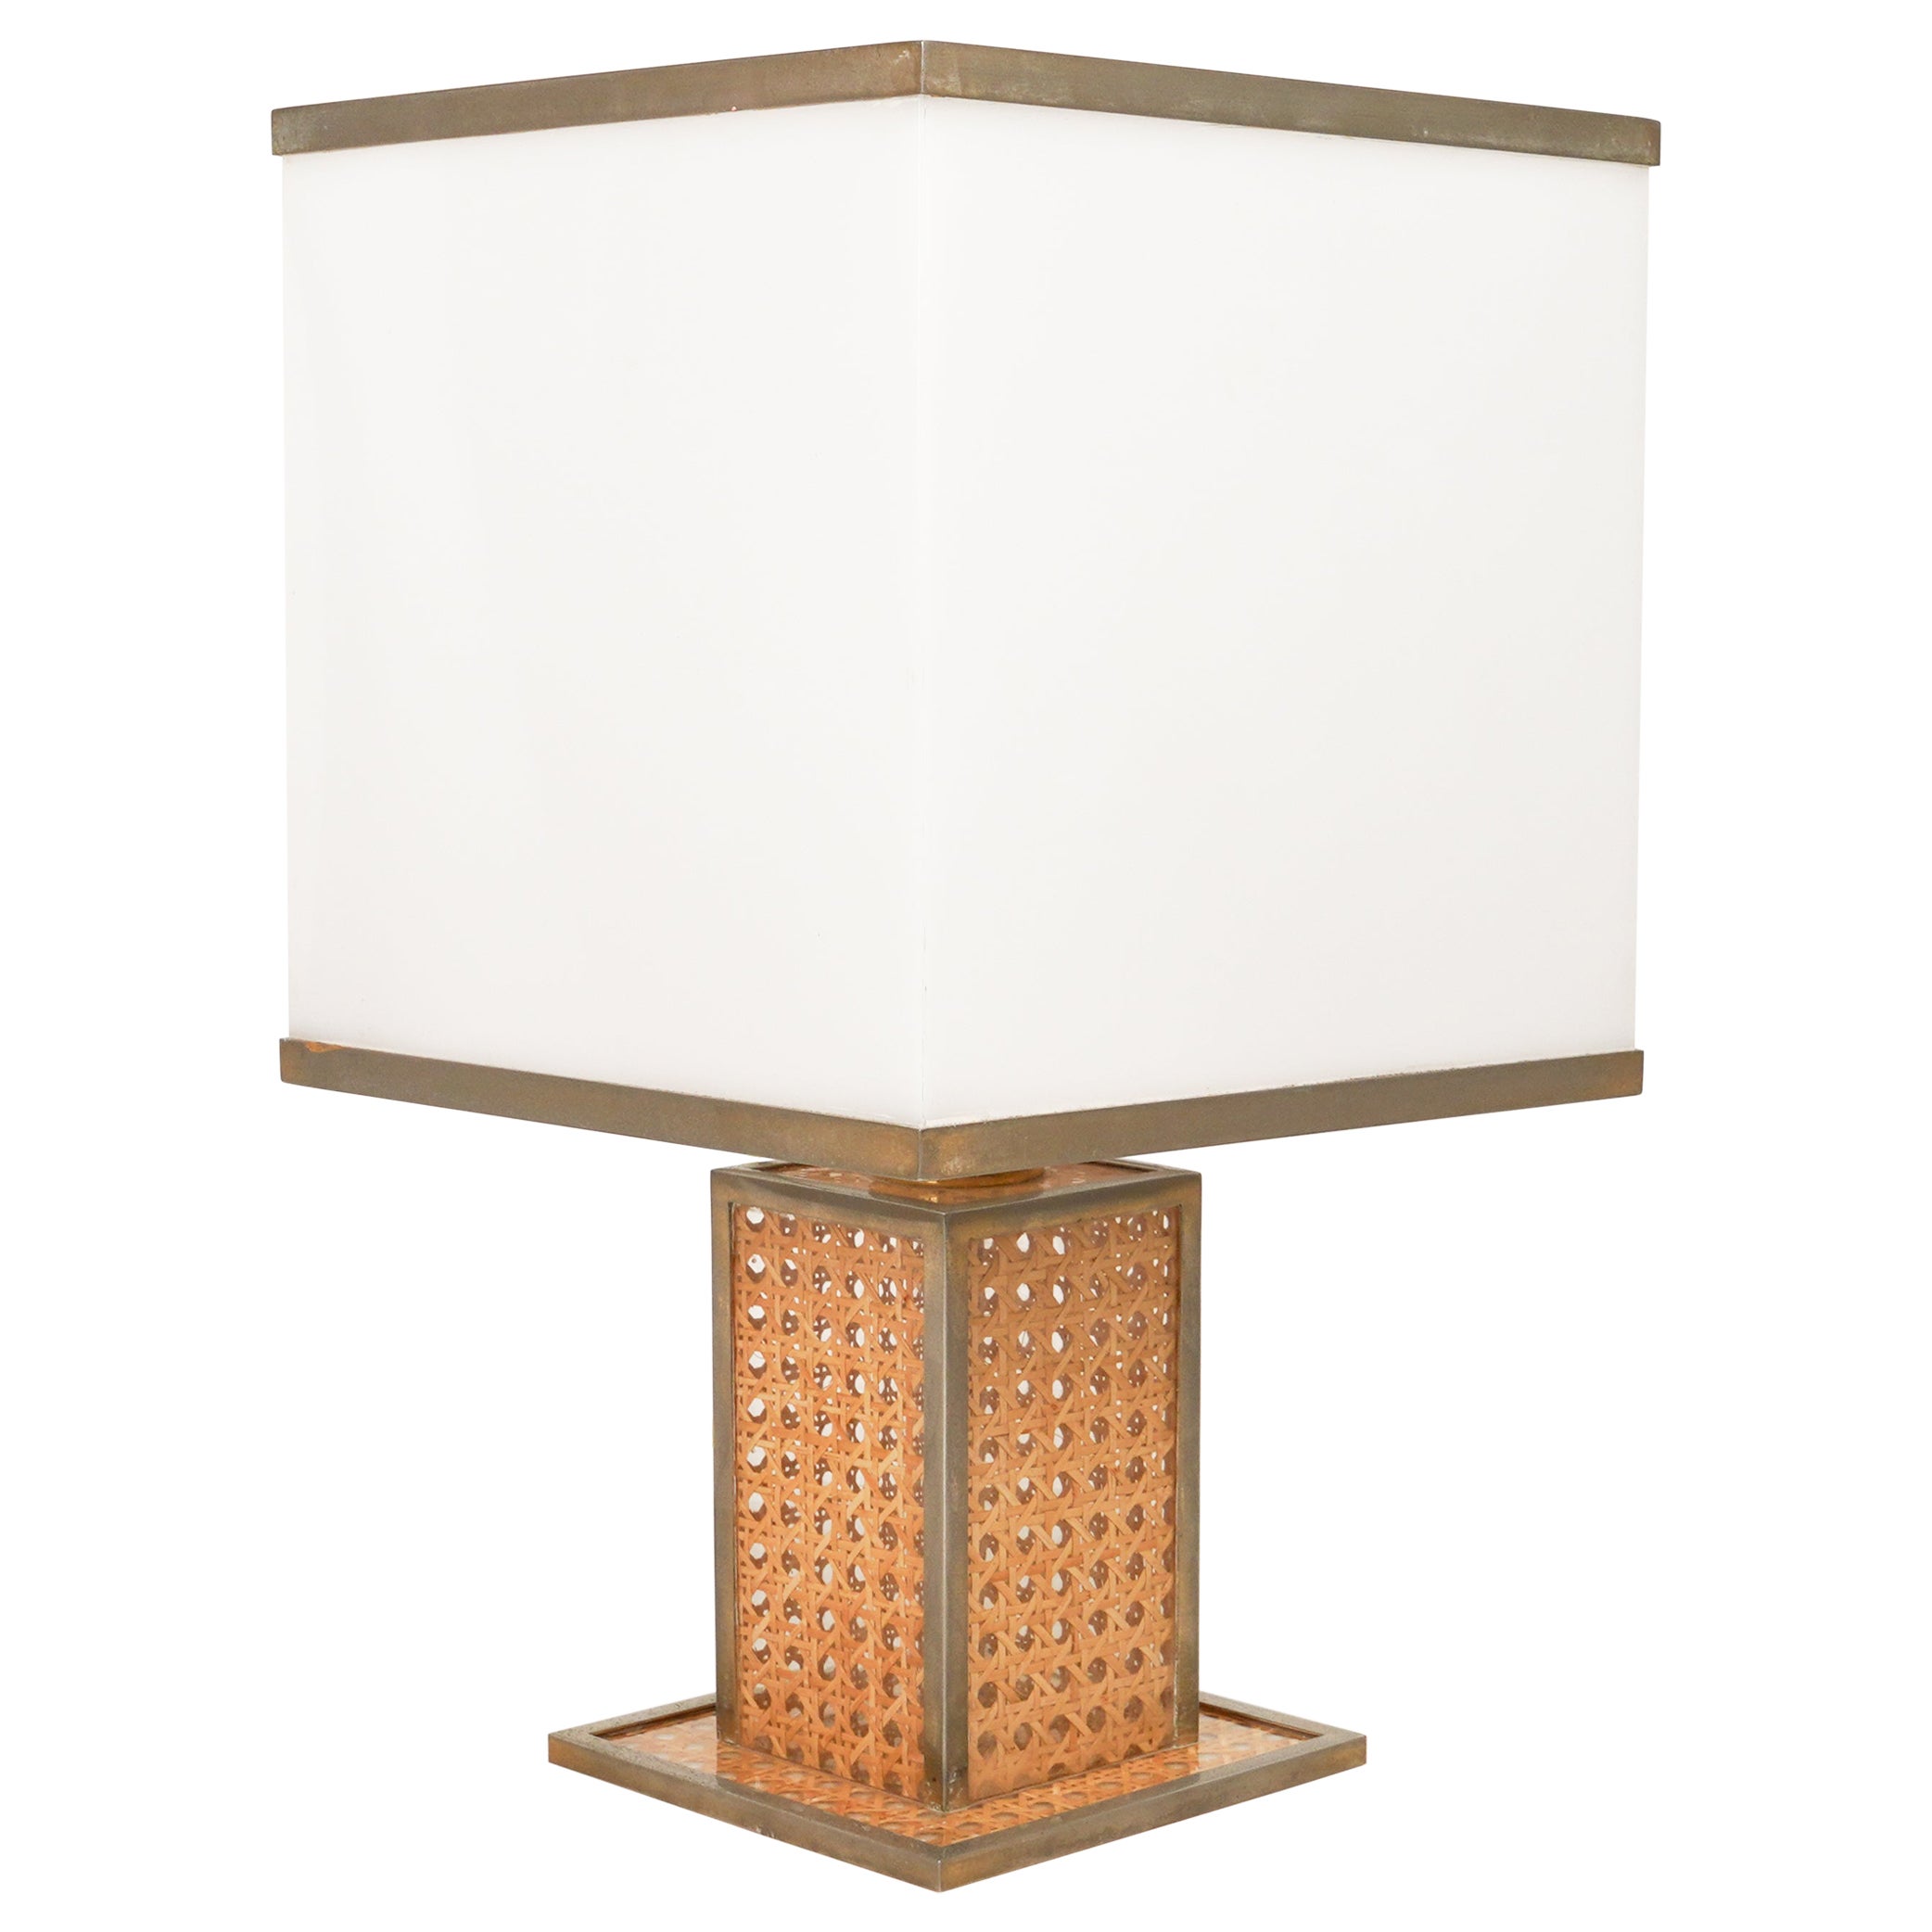 Table Lamp in Lucite, Rattan and Brass Christian Dior Style, Italy 1970s For Sale